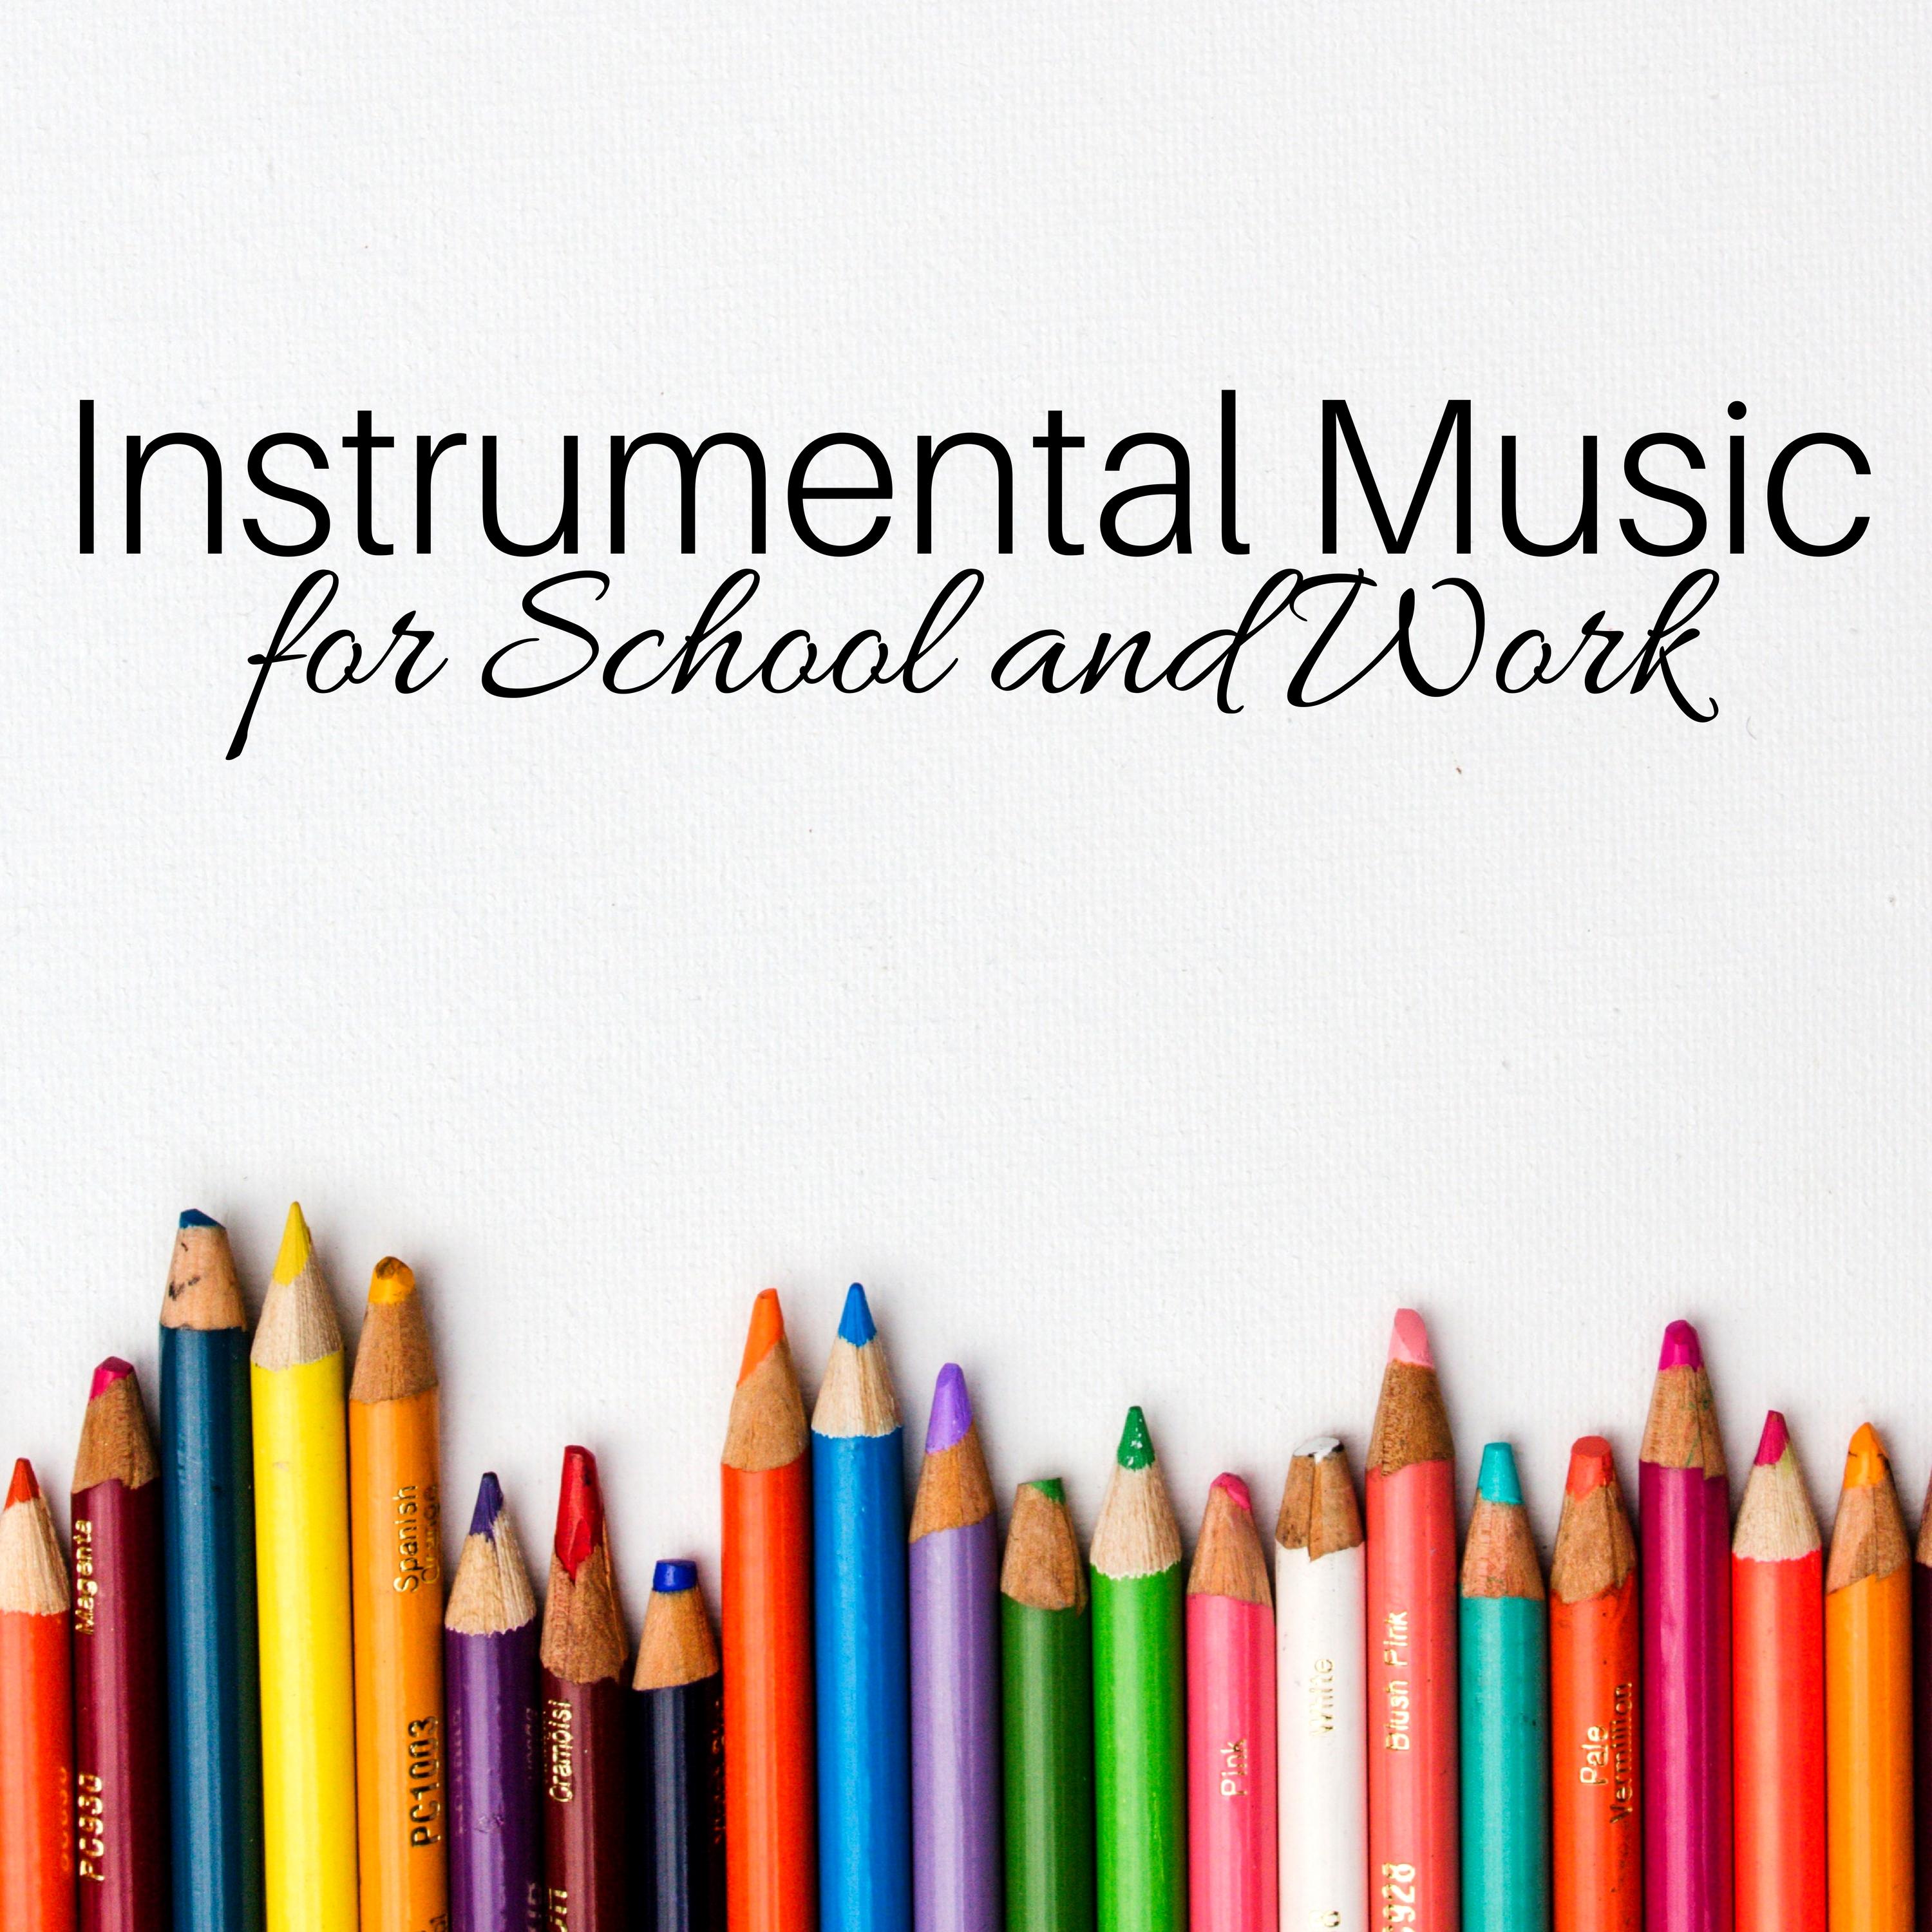 Instrumental Music for School and Work